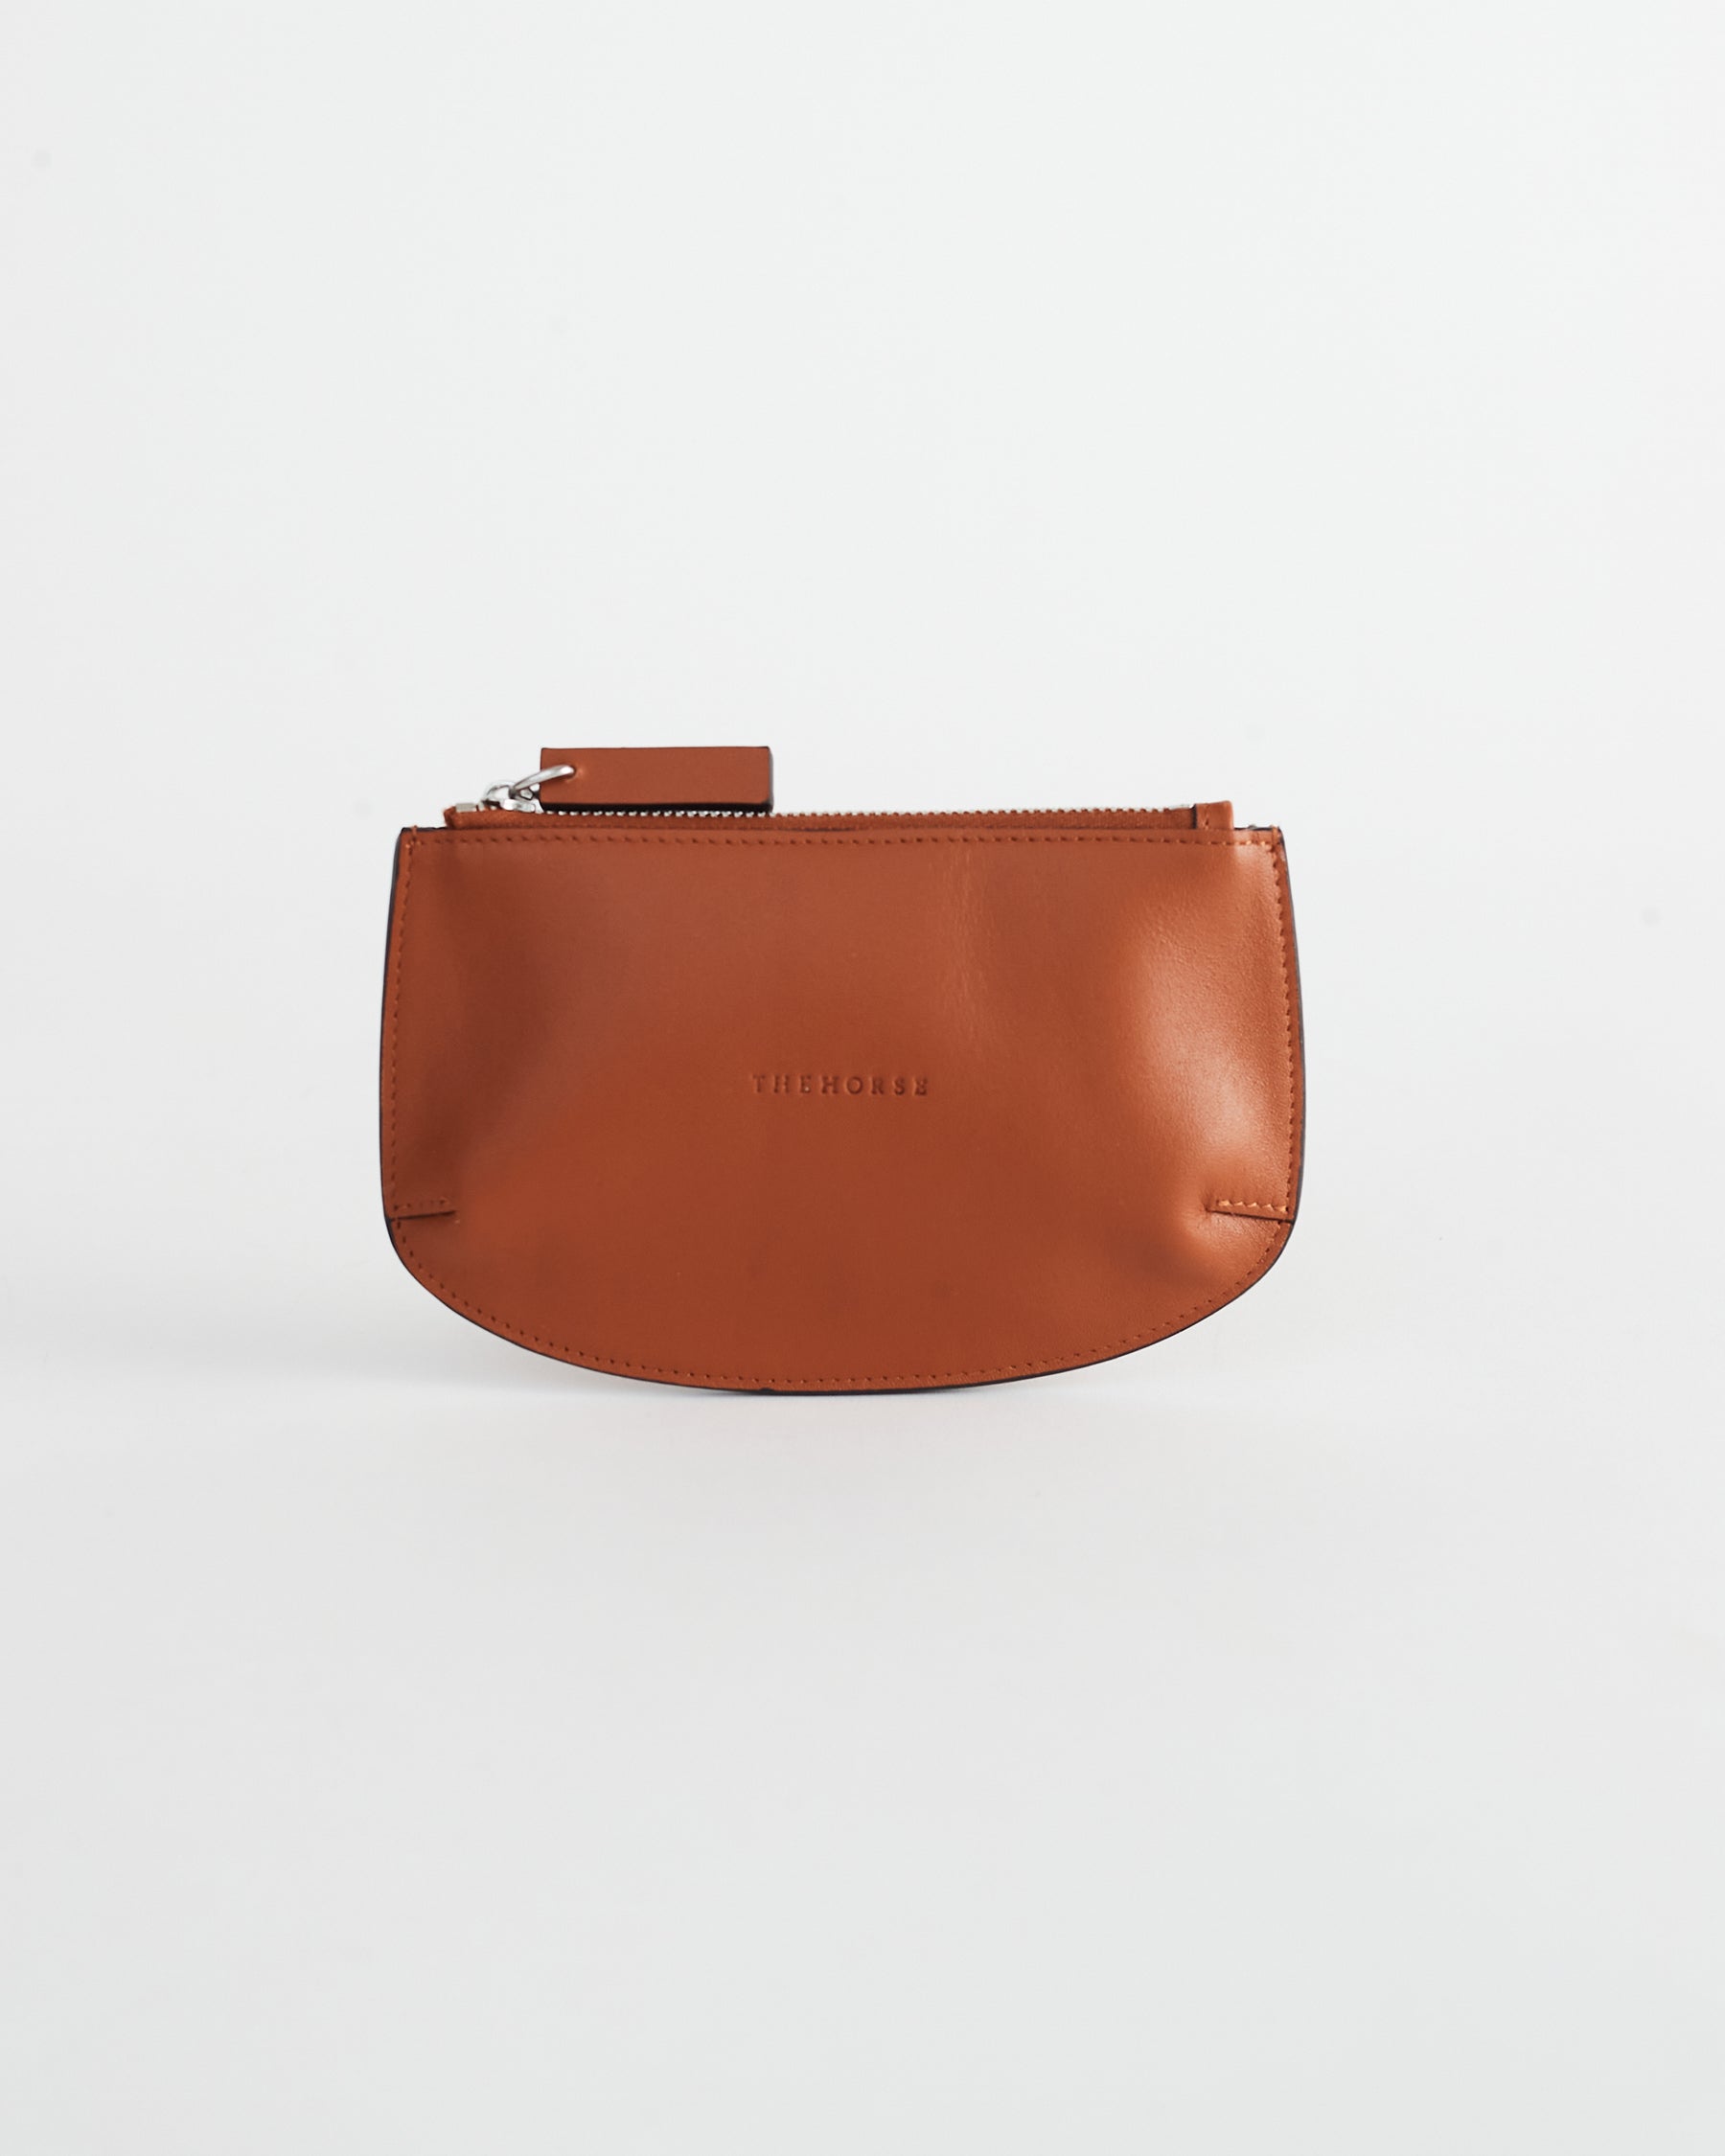 The Drew Women's Leather Zip Cardholder in Tan by The Horse®